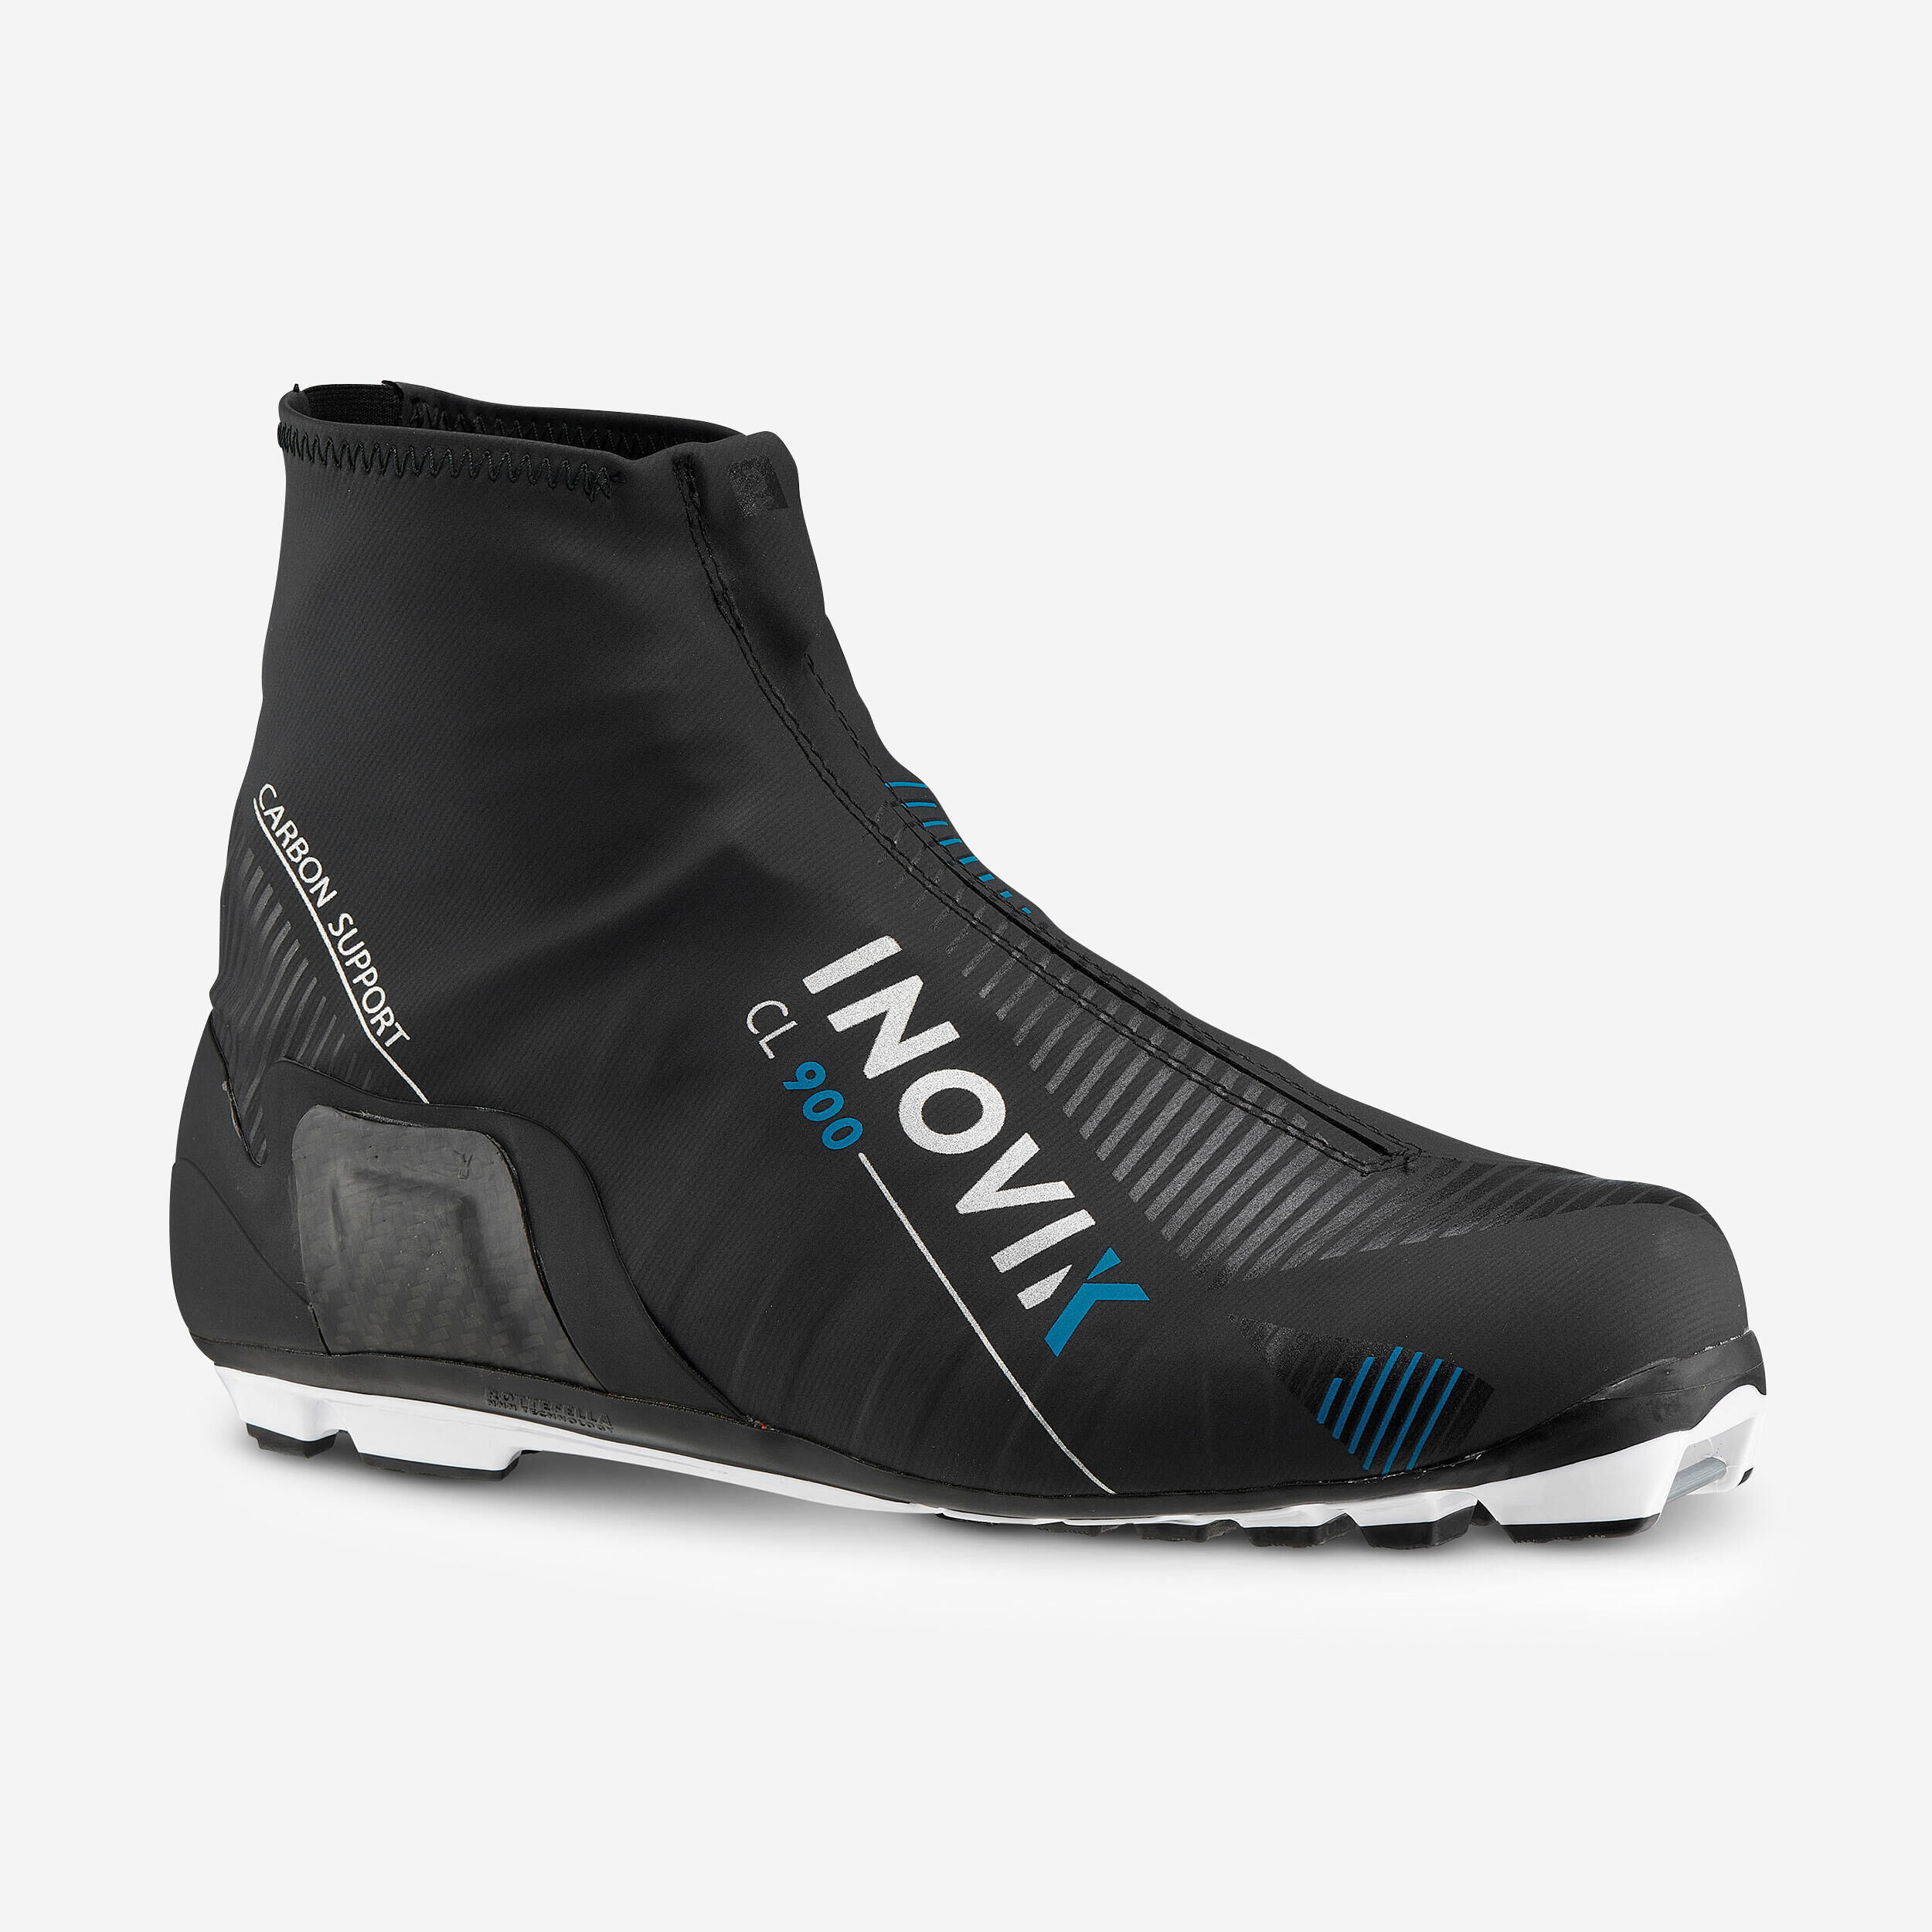 INOVIK Adult Classic Cross-Country Ski Boots - XC S BOOTS 900